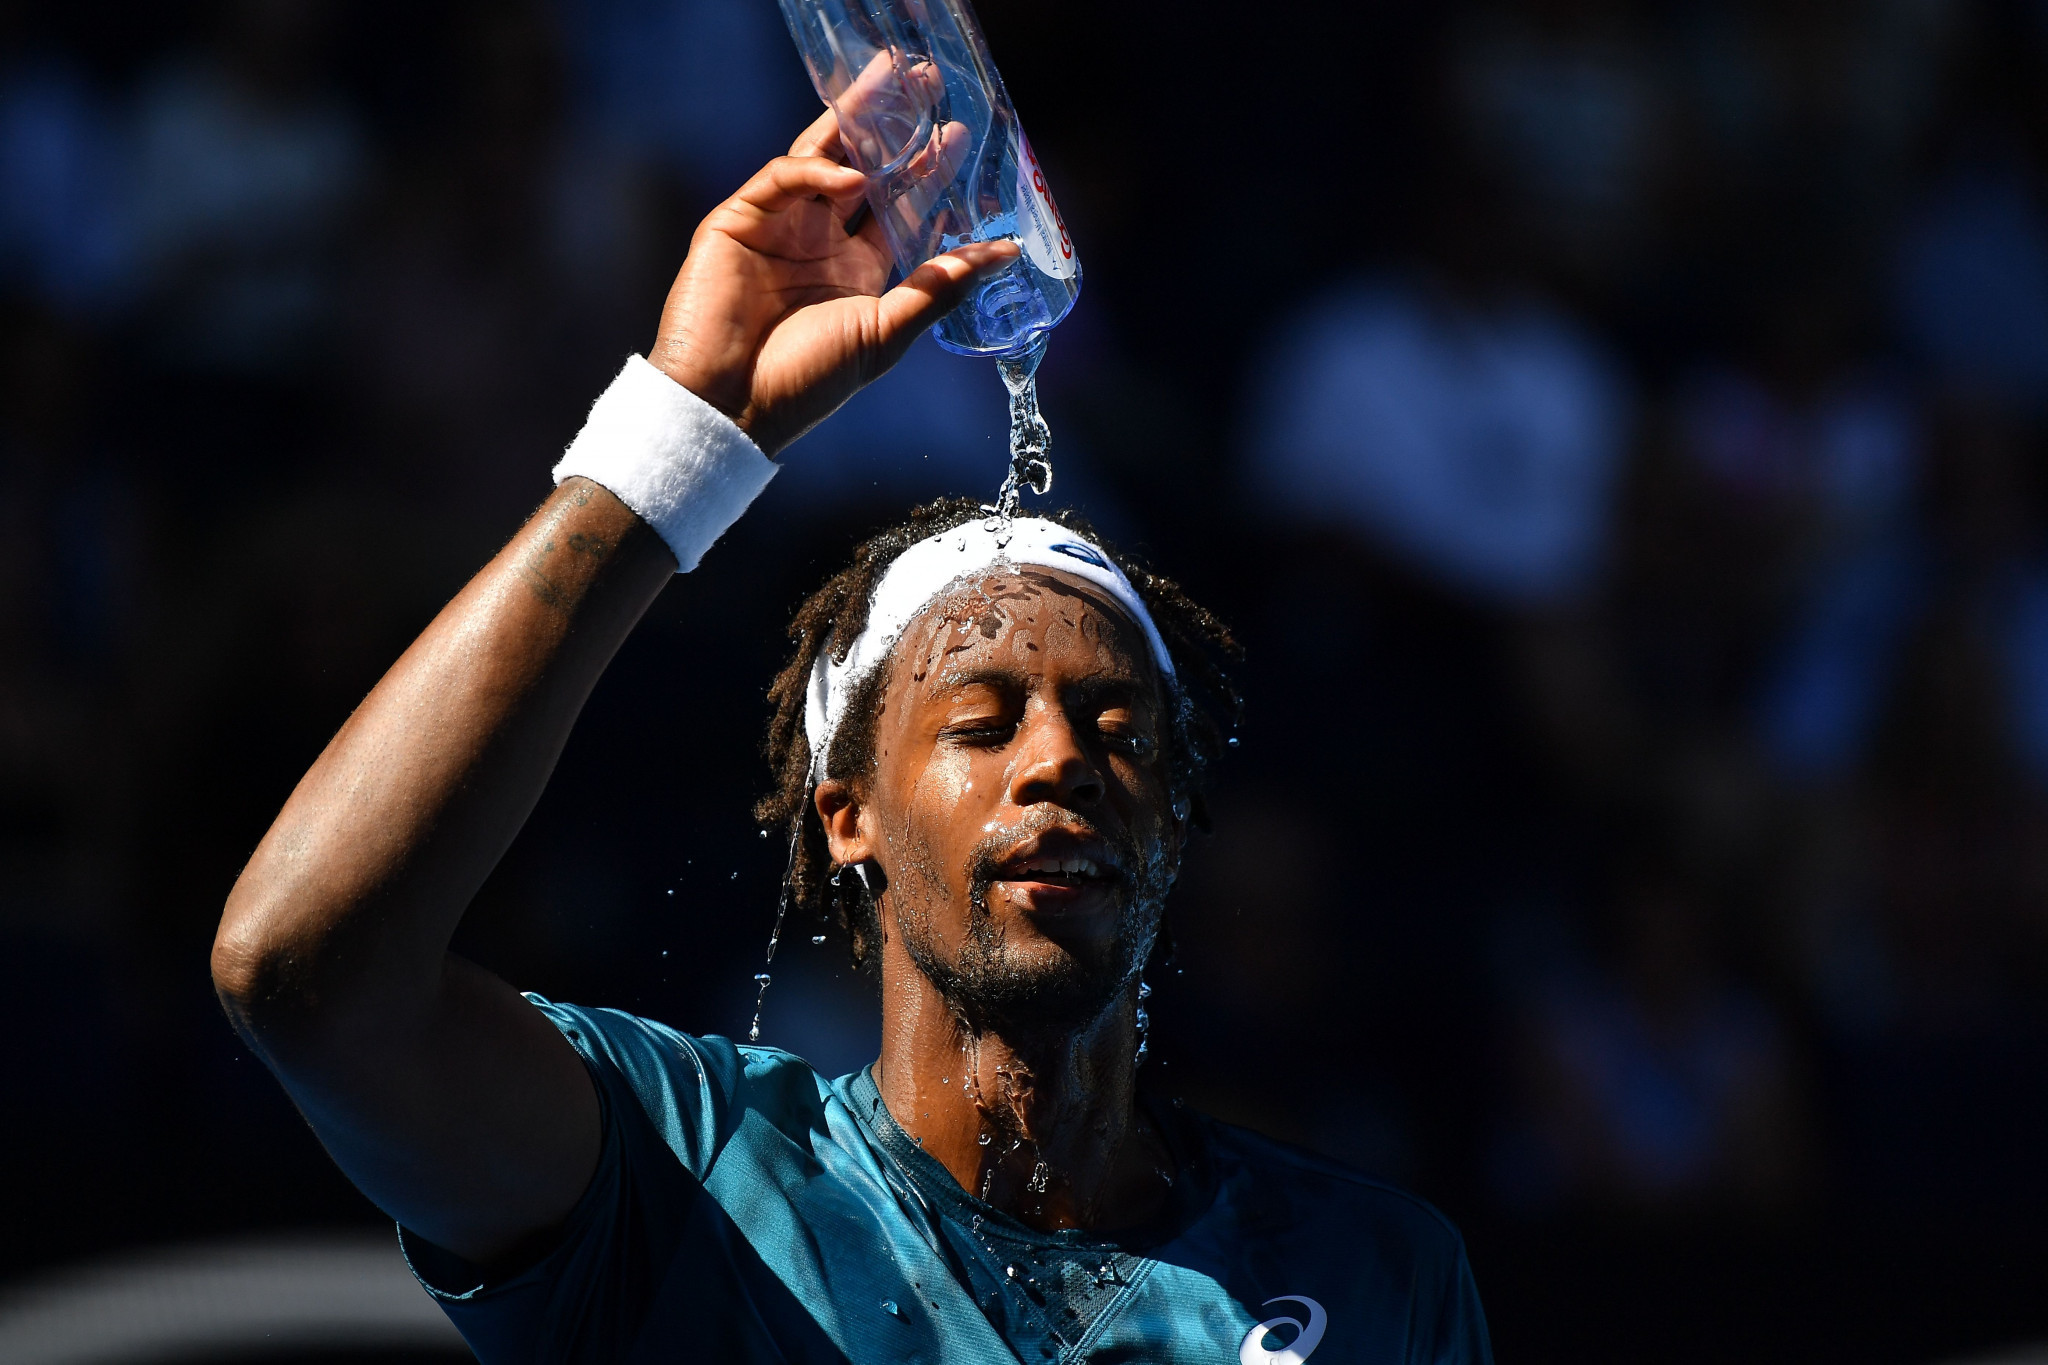 France's Gaël Monfils claimed he was 